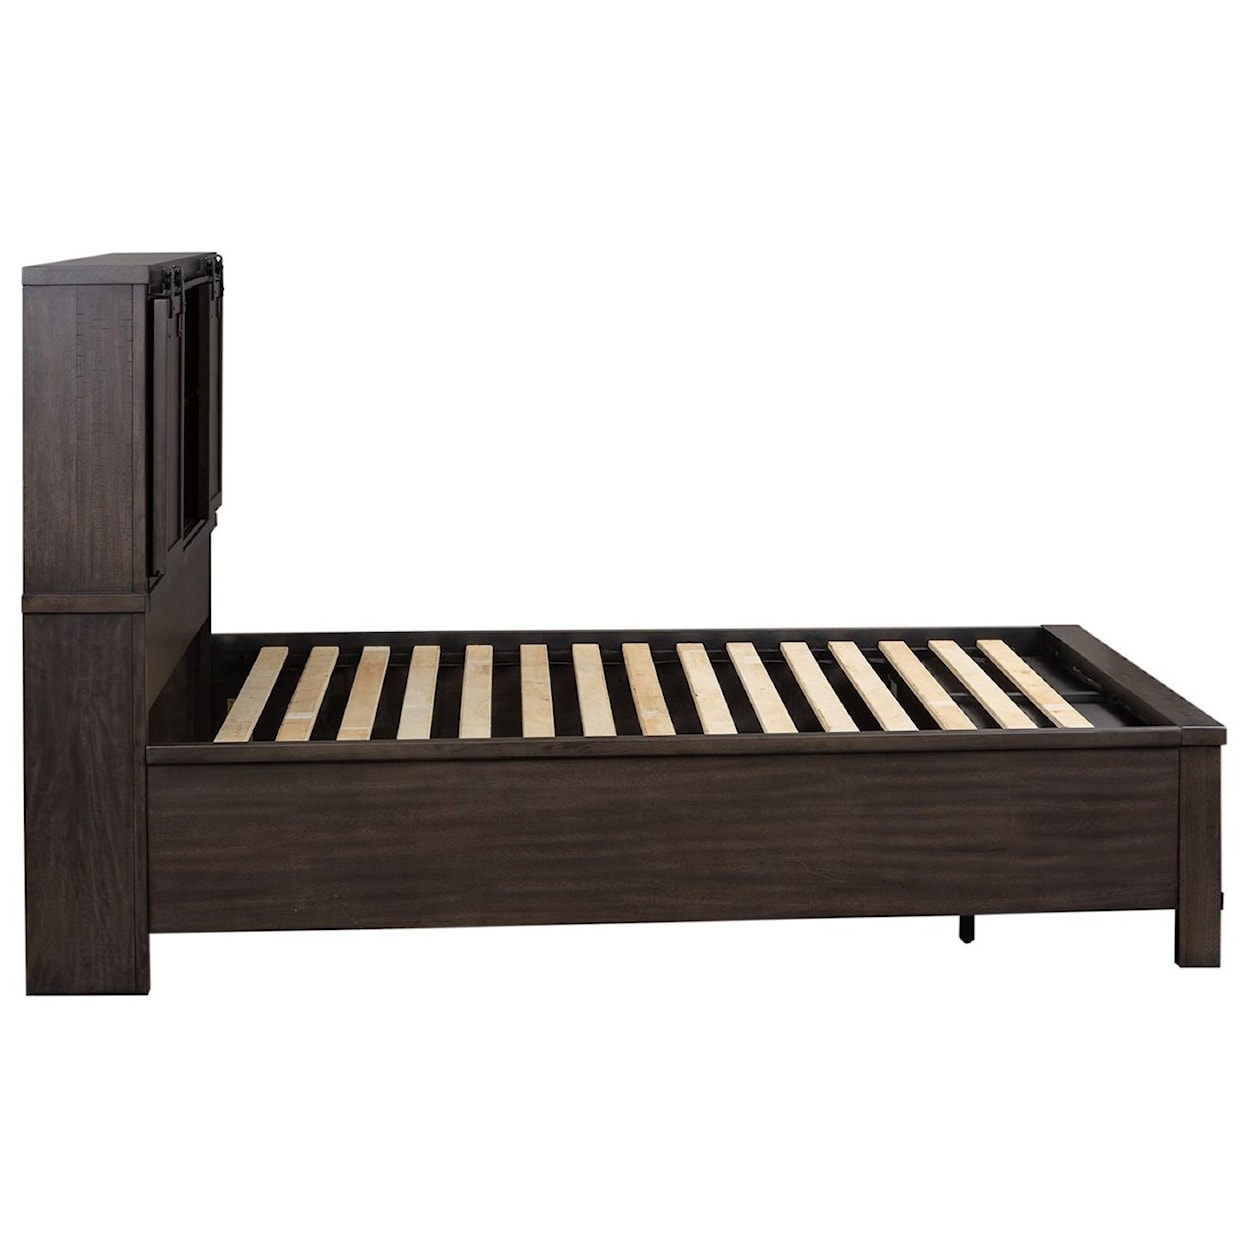 Libby Thornwood Hills King Bookcase Bed